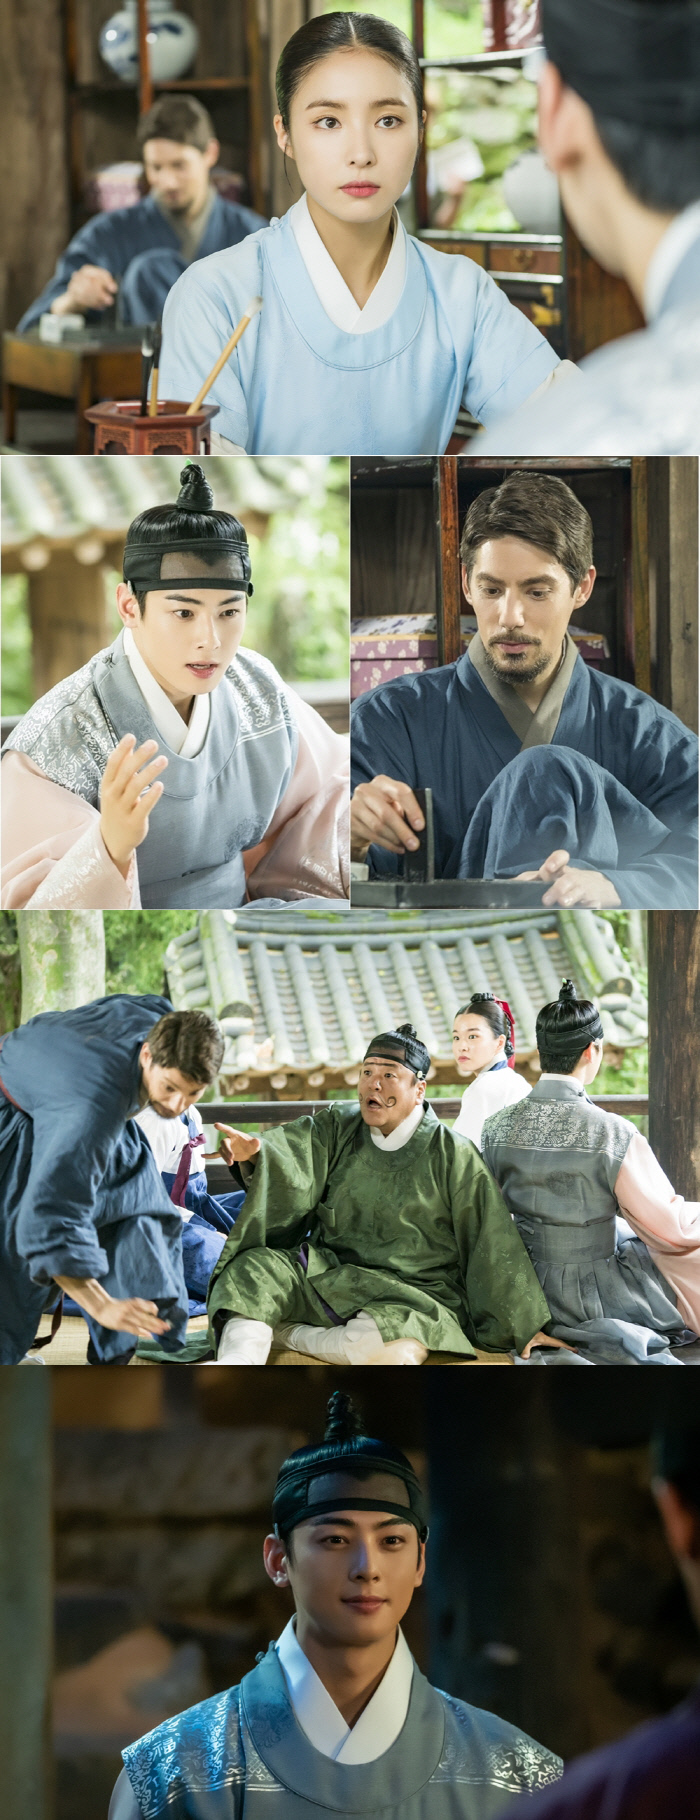 Na Hae-ryung, Shin Se-kyung, Cha Eun-woo, and Fabian offer a cross-border global friendship.Fabian, who turned the palace over with his sudden appearance, is having a good time in Shin Se-kyung, Cha Eun-woo and Green Seodang.I am curious about whether they will be safe in the dangerous encounter and separation with the unfamiliar Stranger.The production team of MBCs tree drama Na Hae-ryung (directed by Kang Il-soo, Han Hyun-hee/playplayed by Kim Ho-soo/produced Green Snake Media) unveiled the friendship between Koo Na Hae-ryung (Thursday), Lee Lim (Cha Eun-woo), and Foreigner (Pavian).In the 25-26 episode of the new cadet, the palace was overturned by the appearance of the yellow-haired stranger The Stranger.Na Hae-ryung, Irim, and Lee are sharing friendship with each other while hiding in the greenery hall to avoid the goldsmiths who are trying to catch him.First, Na Hae-ryung, who has a nervous expression, and Irim, who is vomiting, were captured.As it turns out, Irim is impressed by the story of Na Hae-ryung.But Na Hae-ryung is indifferent, unlike the godly Irim, who is quietly grinning at his food as if he does not know it.Then, Irim and I have a good time and are flowering friendship, which gives me a sense of warmth.The ridiculous face of the sitting up and the appearance of the unrecognized, the appearance of the right to run away stimulates the laughter of the viewers.Finally, the appearance of Irim and Im, who met late at night, catches the eye. The moment of separation came to the two people who had a good time in Na Hae-ryung, Sambo, Nine and the Green Seodang.Everyone in the palace is keen to turn on the light and find it, and there is a growing interest in whether the two people will be able to make a beautiful farewell safely.Na Hae-ryung, Irim, and Lee build cross-border friendships in the Green Seodang, said the production team of the new employee, and I would like to ask for your attention to how Na Hae-ryung and Irim will help you escape from the friendhood, and whether all three people will be safe.The 27-28 episode of The New Entrance Officer, Na Hae-ryung, starring Shin Se-kyung, Cha Eun-woo and Park Ki-woong, will air Thursday, 29 at 8:55 p.m.